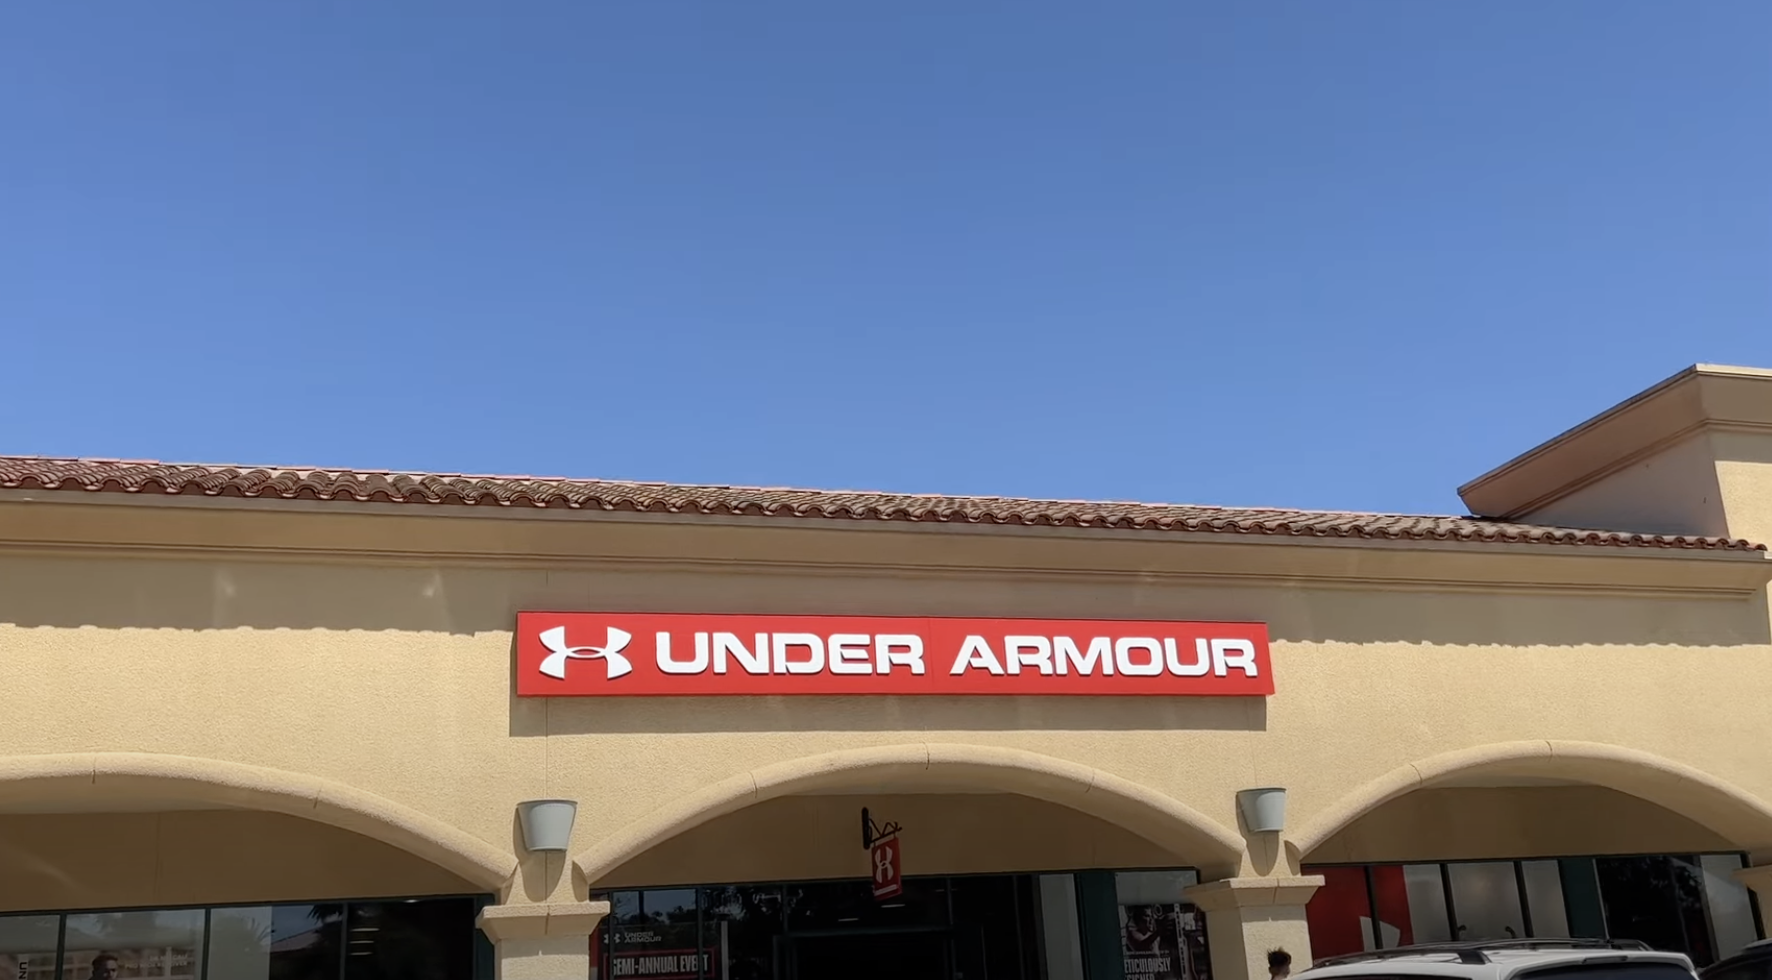 under armour-store front